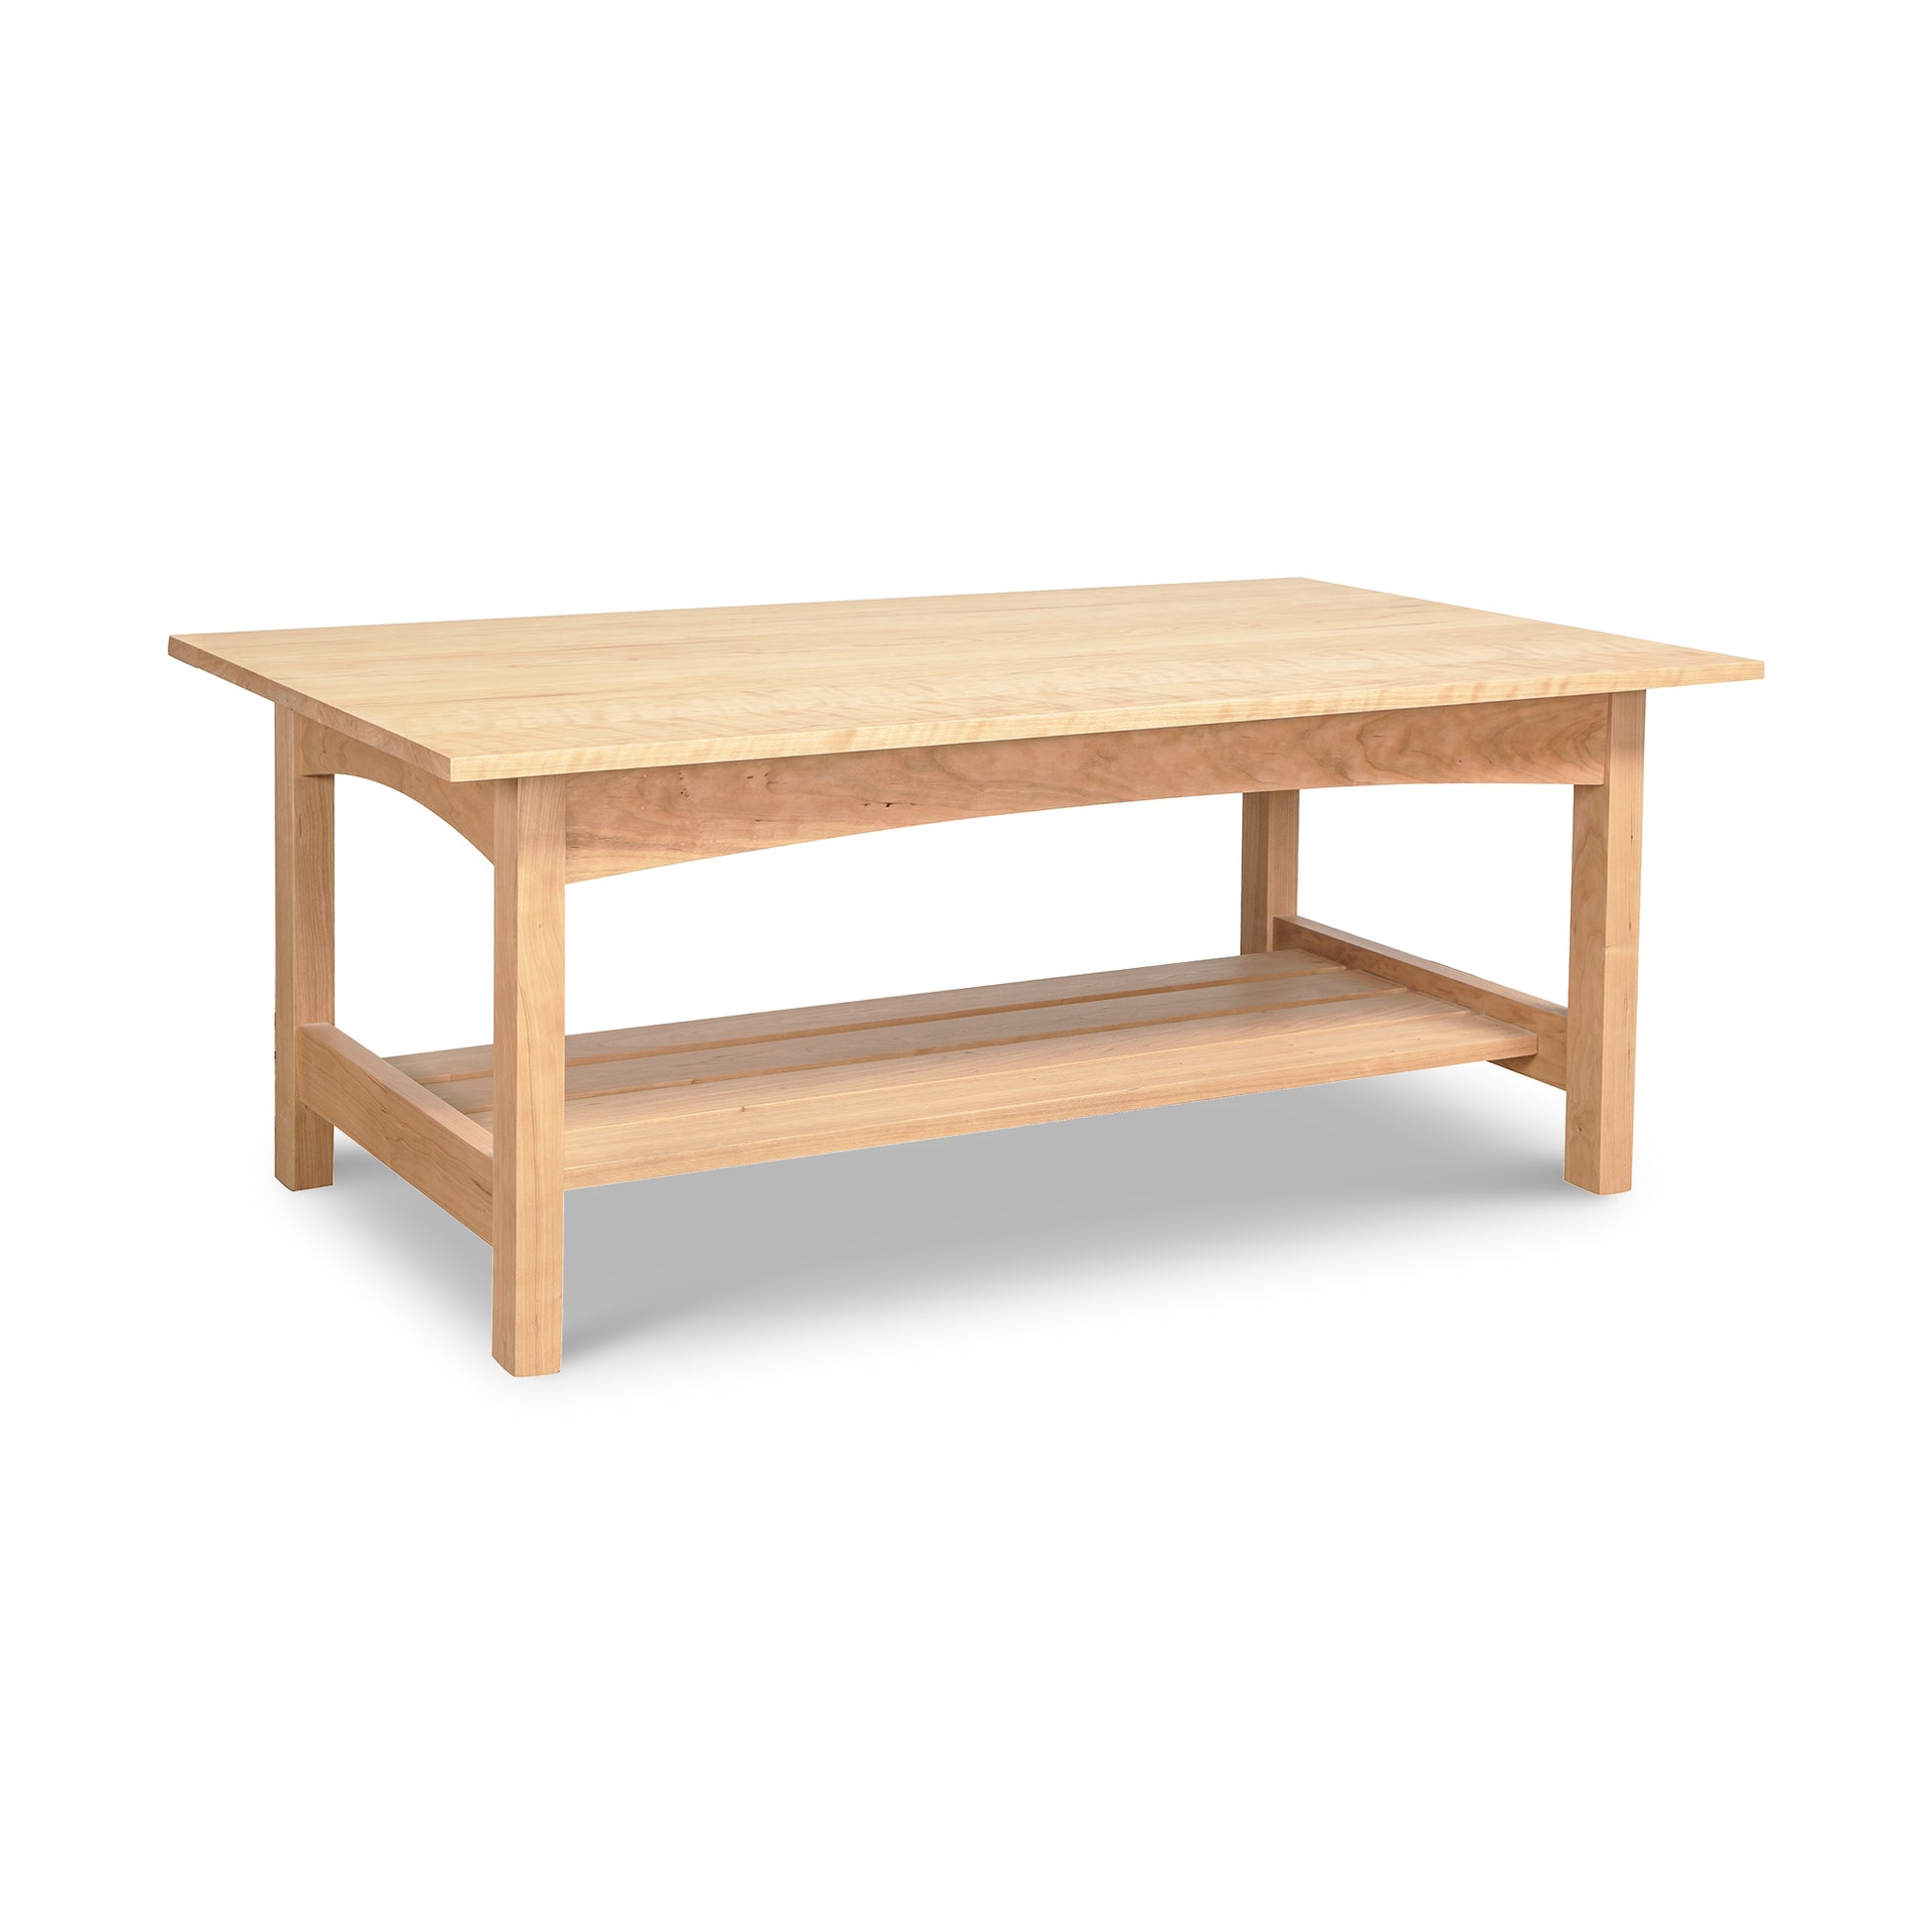 A handmade Vermont Furniture Designs Burlington Shaker coffee table crafted from solid wood, featuring a shelf on top.